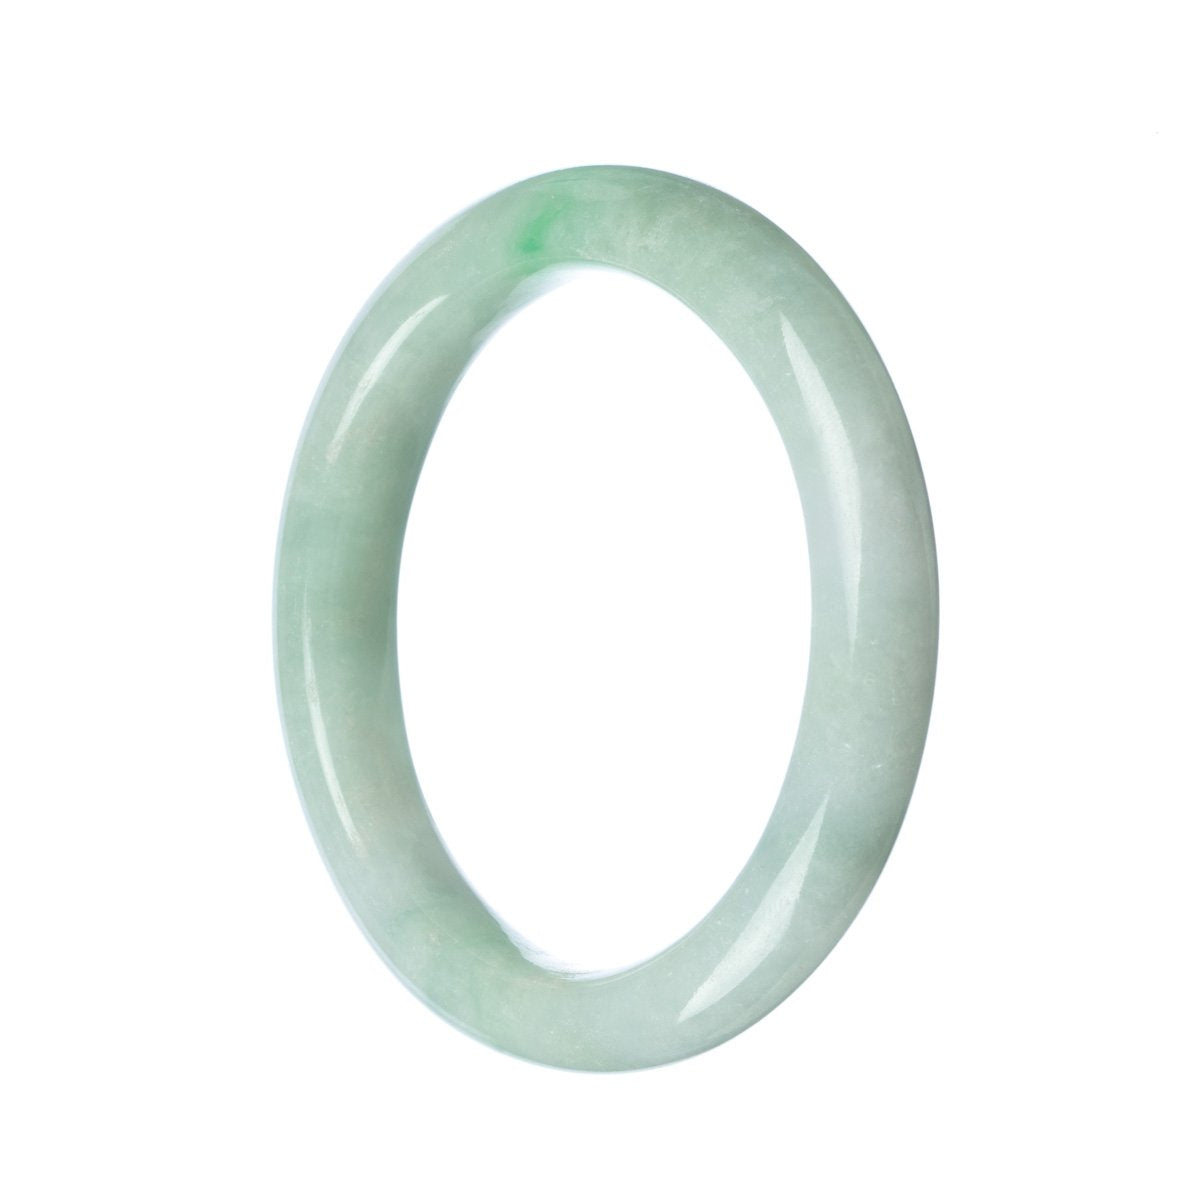 A beautiful, untreated green jade bangle with a semi-round shape, measuring 63mm in diameter. Perfect for those seeking a traditional and authentic piece.